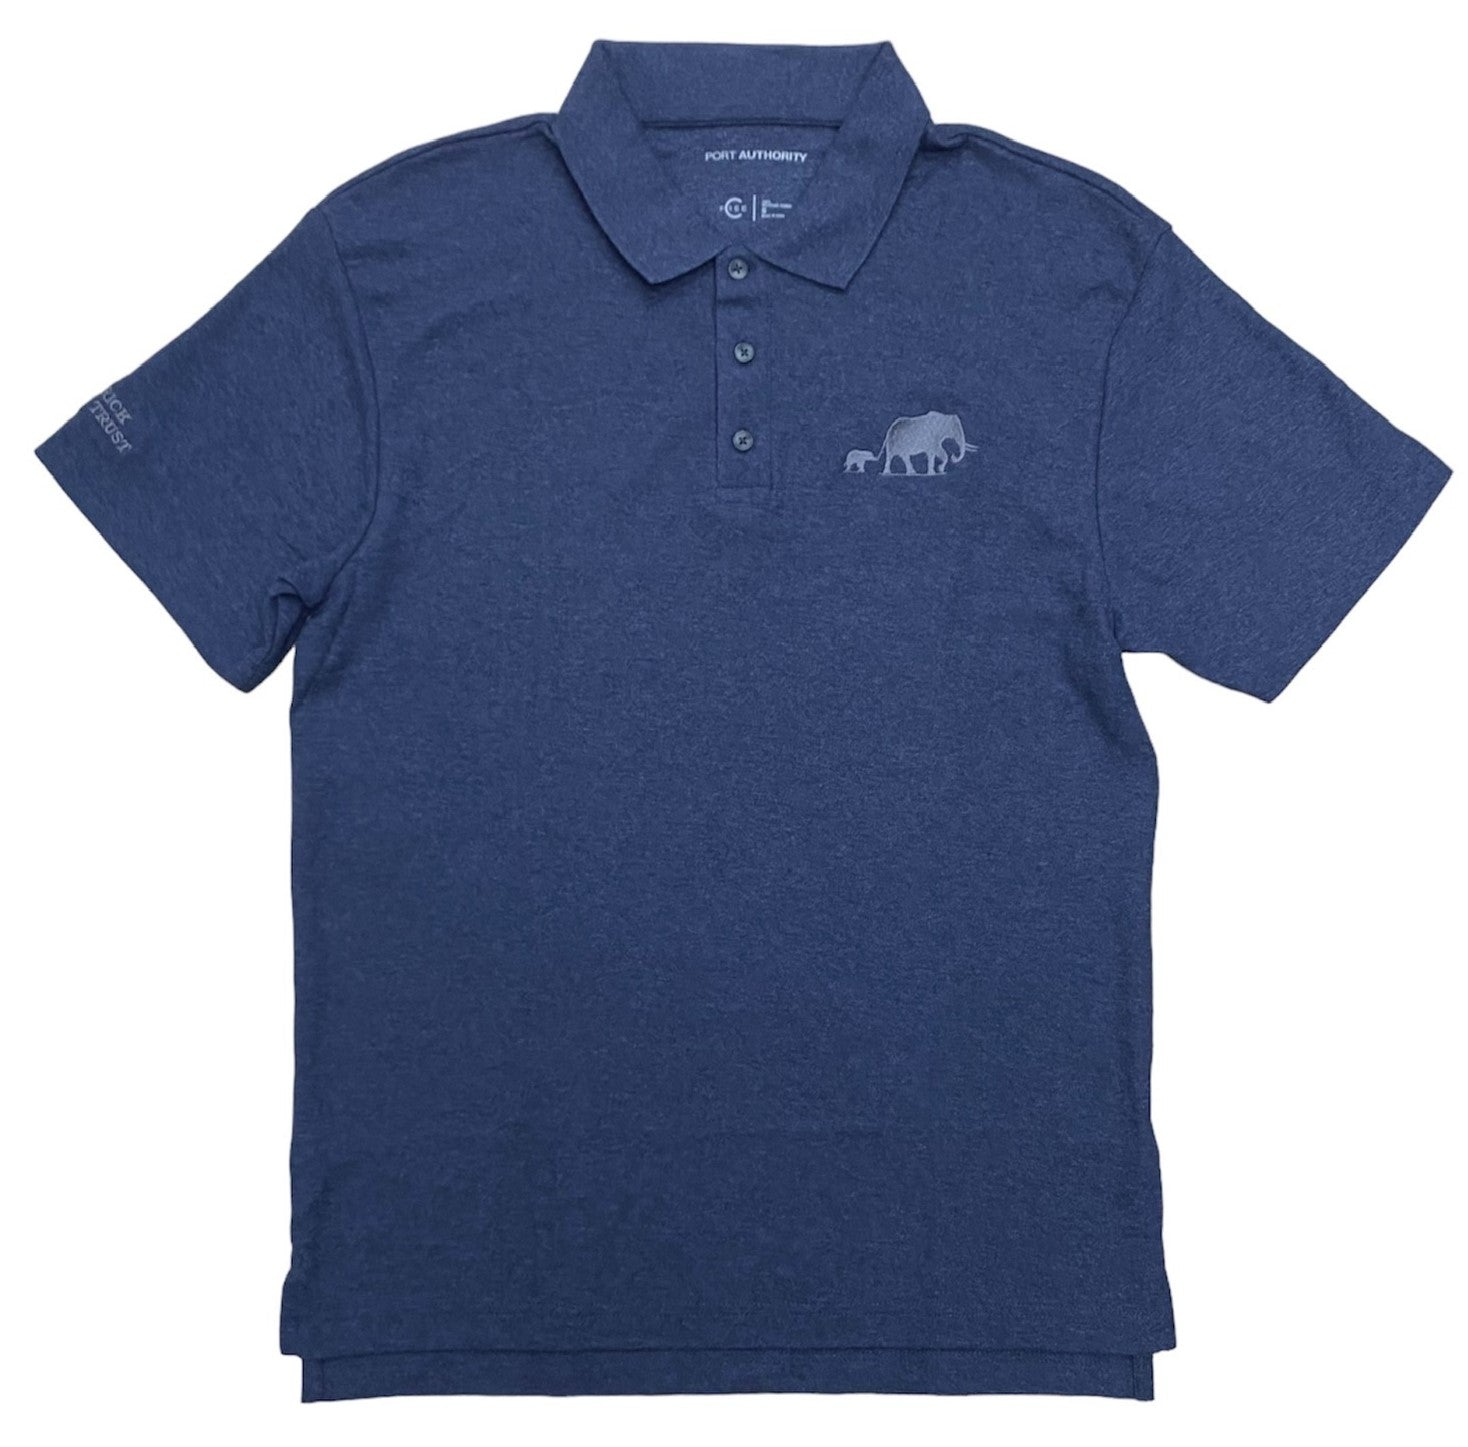 Embroidered Men's Polo Shirt- Blue